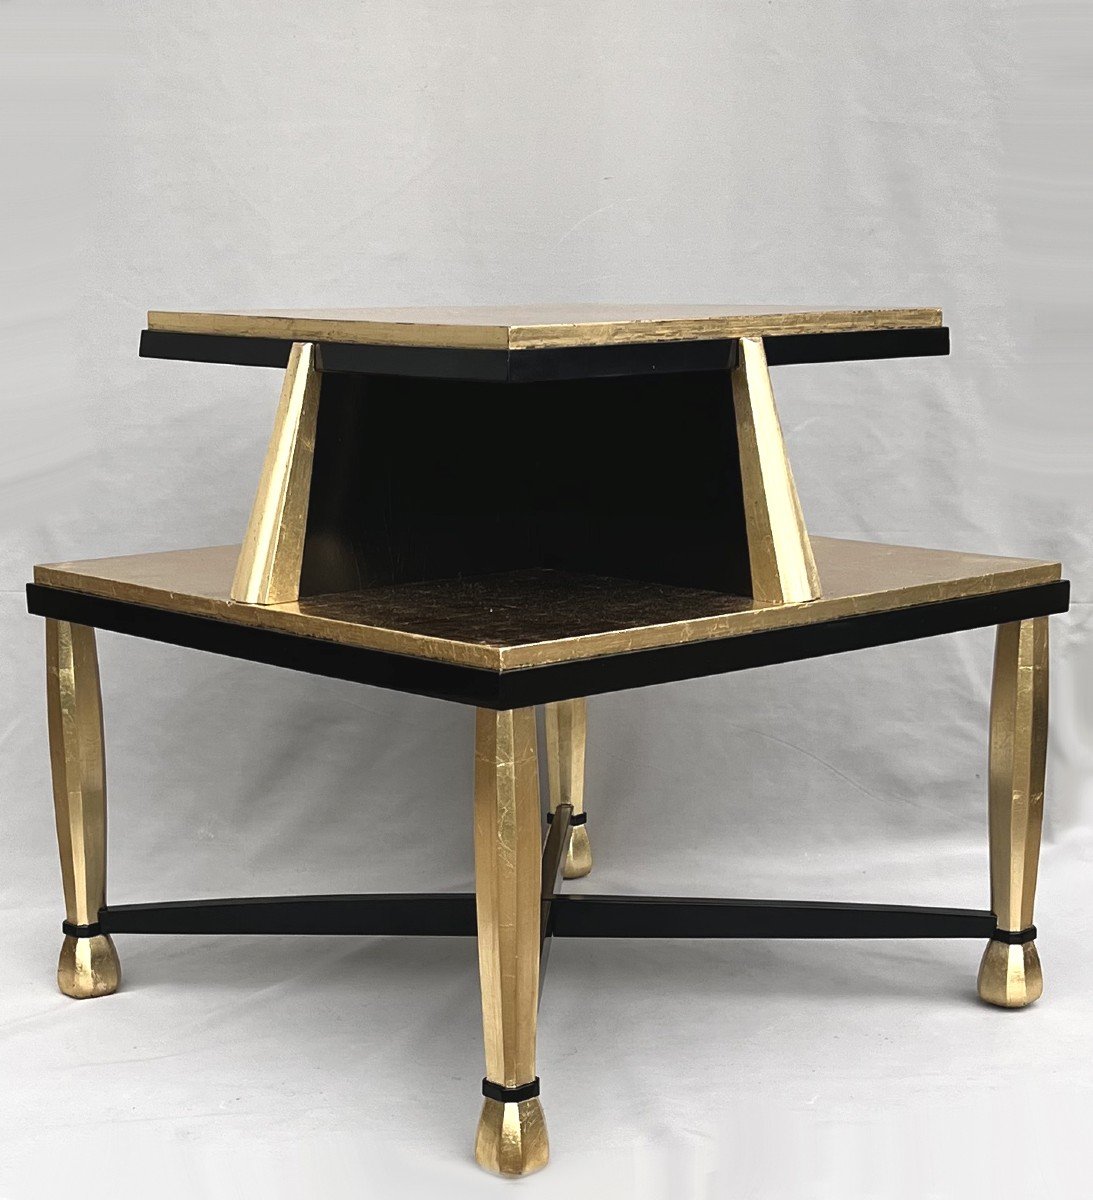 Important Art Deco Pedestal Table In Golden Wood And Black Lacquer-photo-3